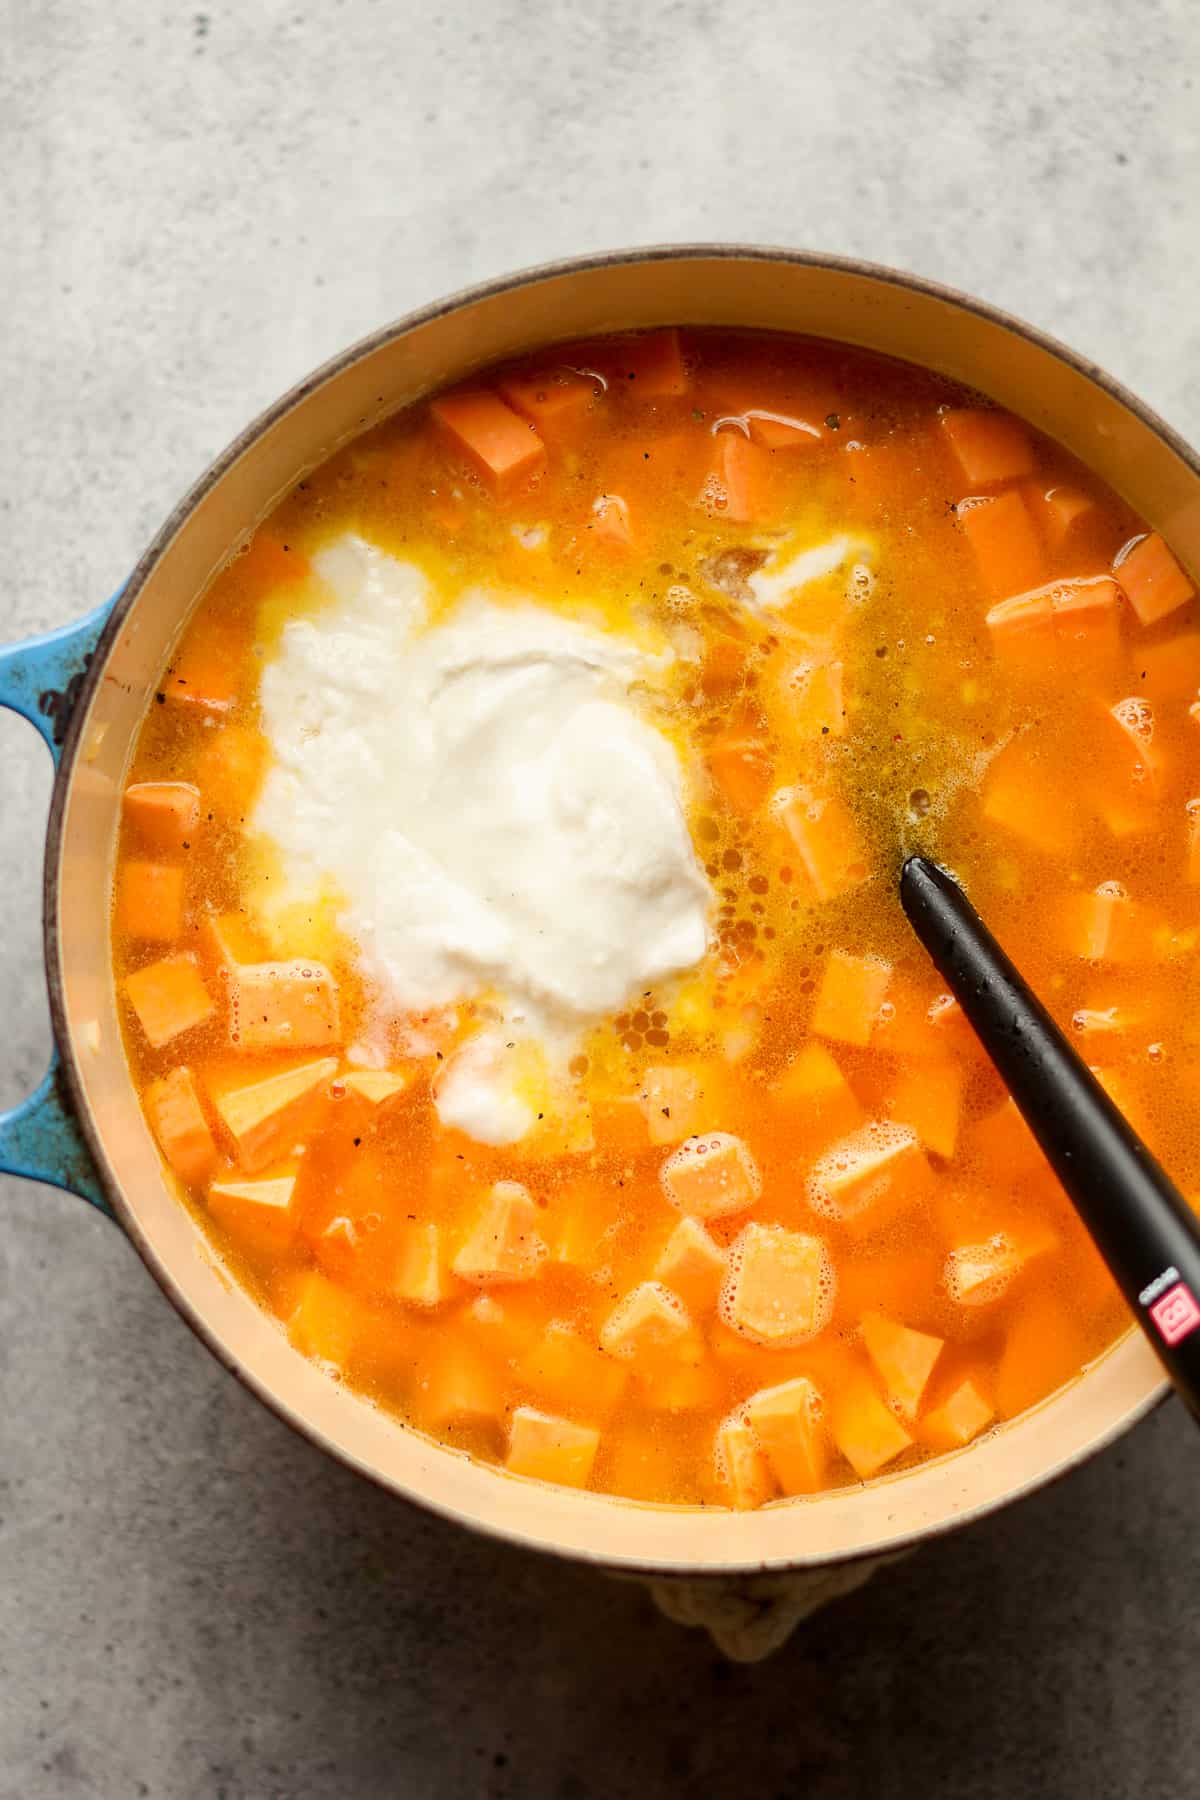 The pot of soup with chunks of sweet potatoes and the coconut on top.